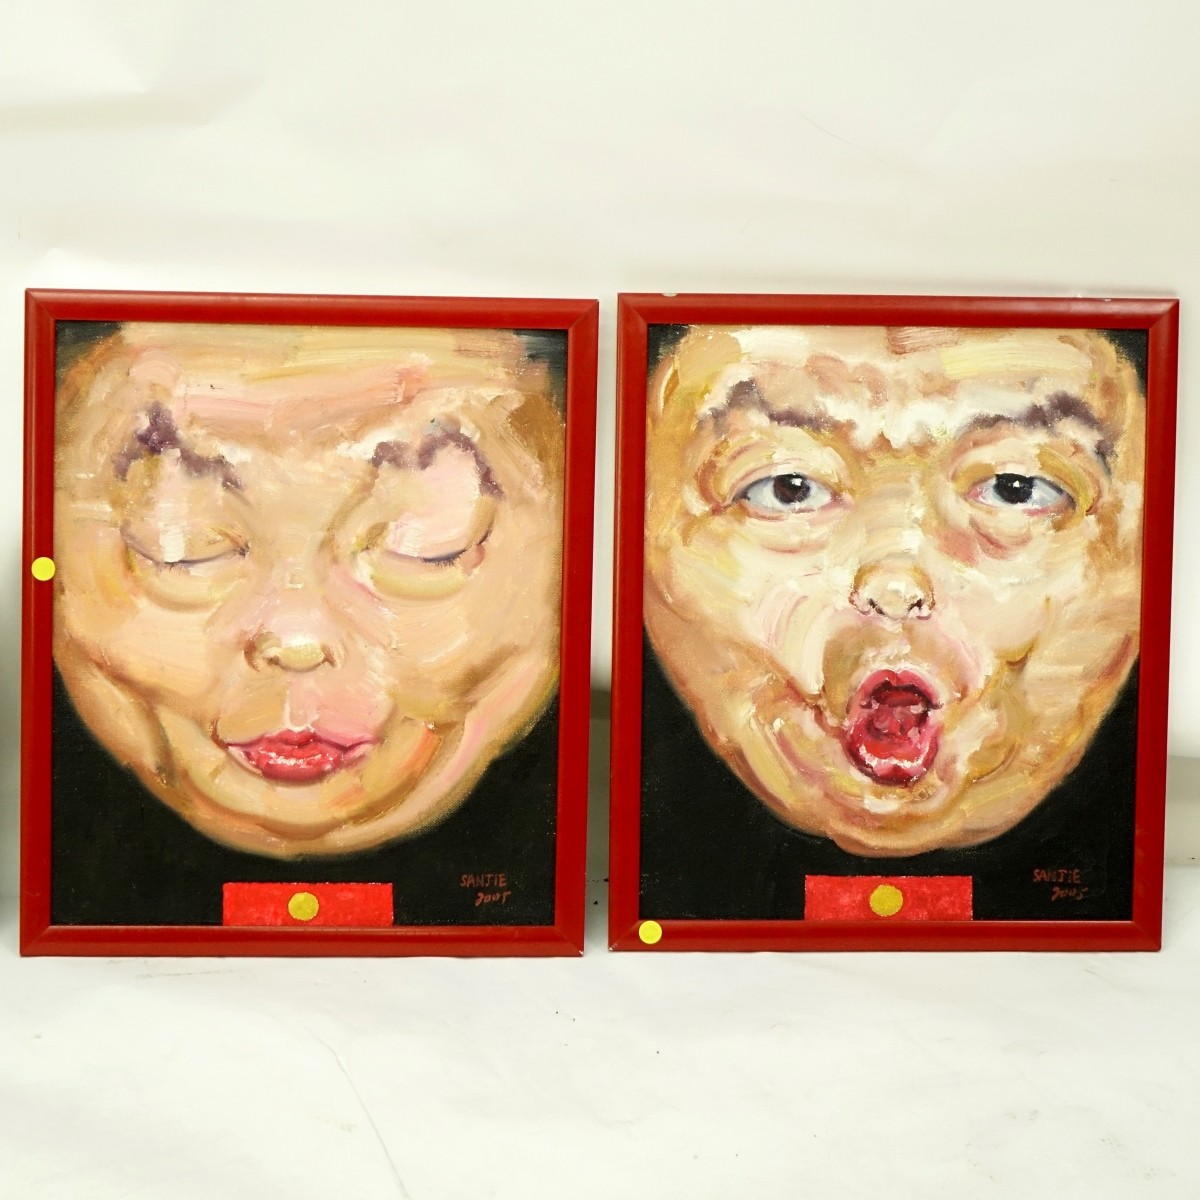 Wang Sanjie, Chinese (20th C) O/C, Four Male Faces